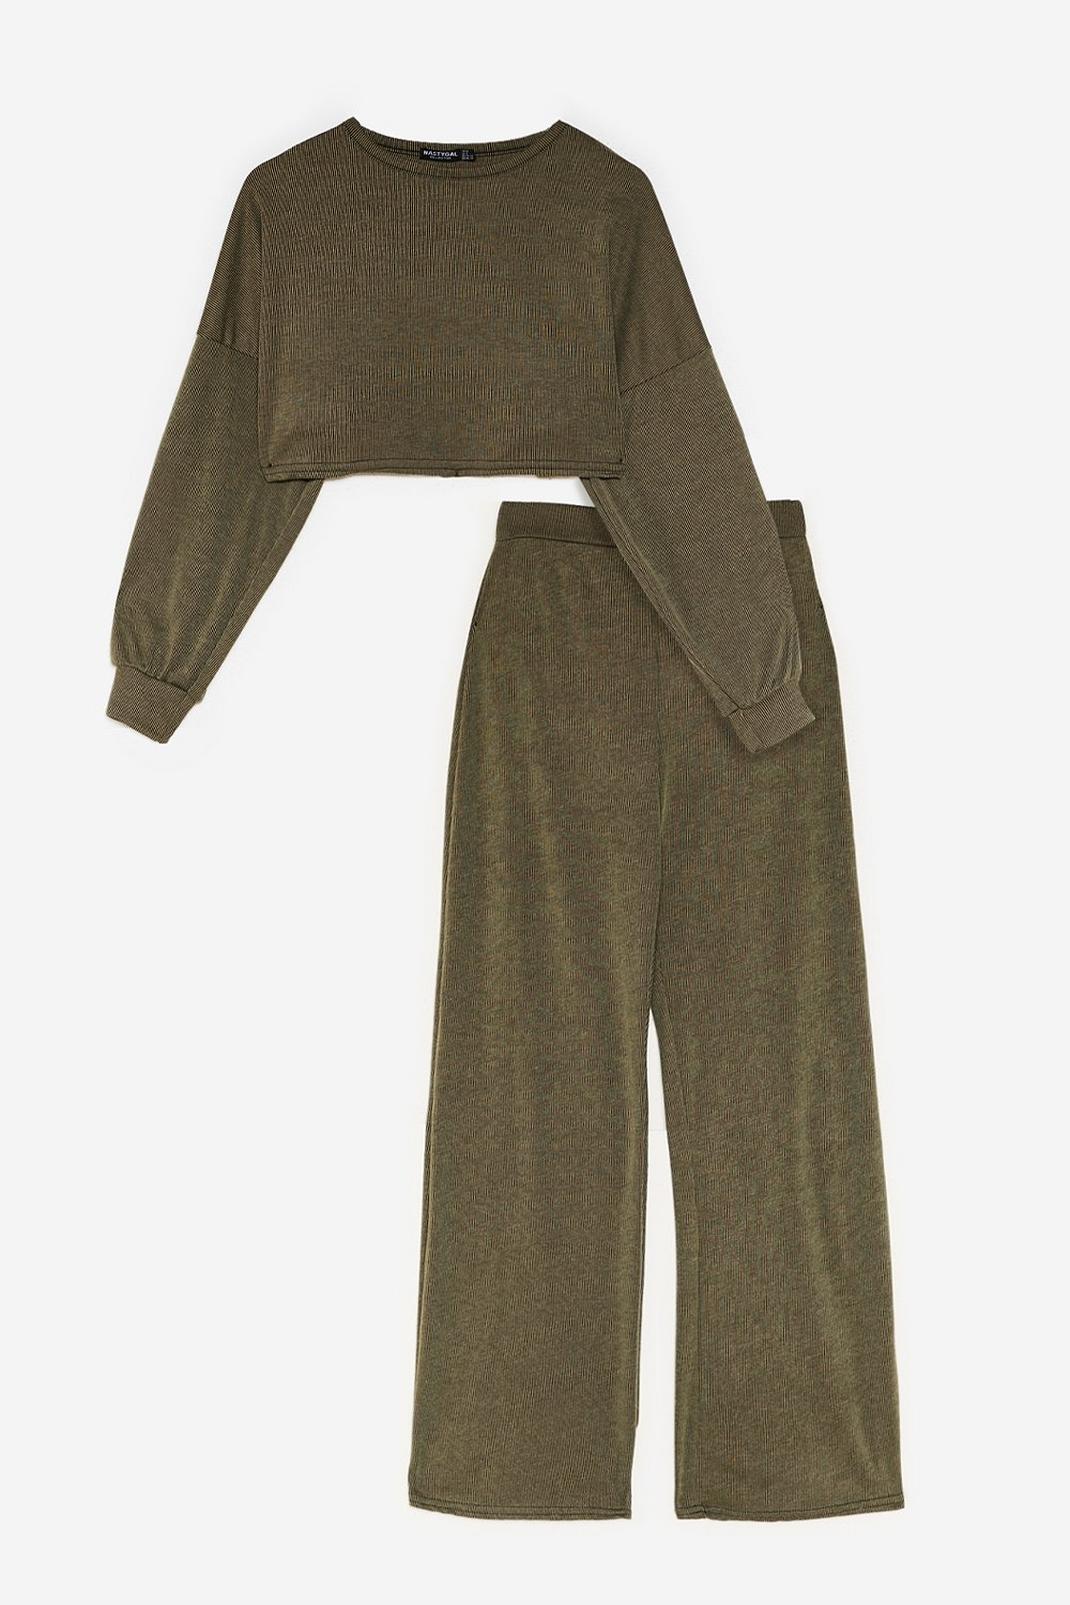 Khaki Back to Basics Petite Crop Top and Trousers Lounge Set image number 1